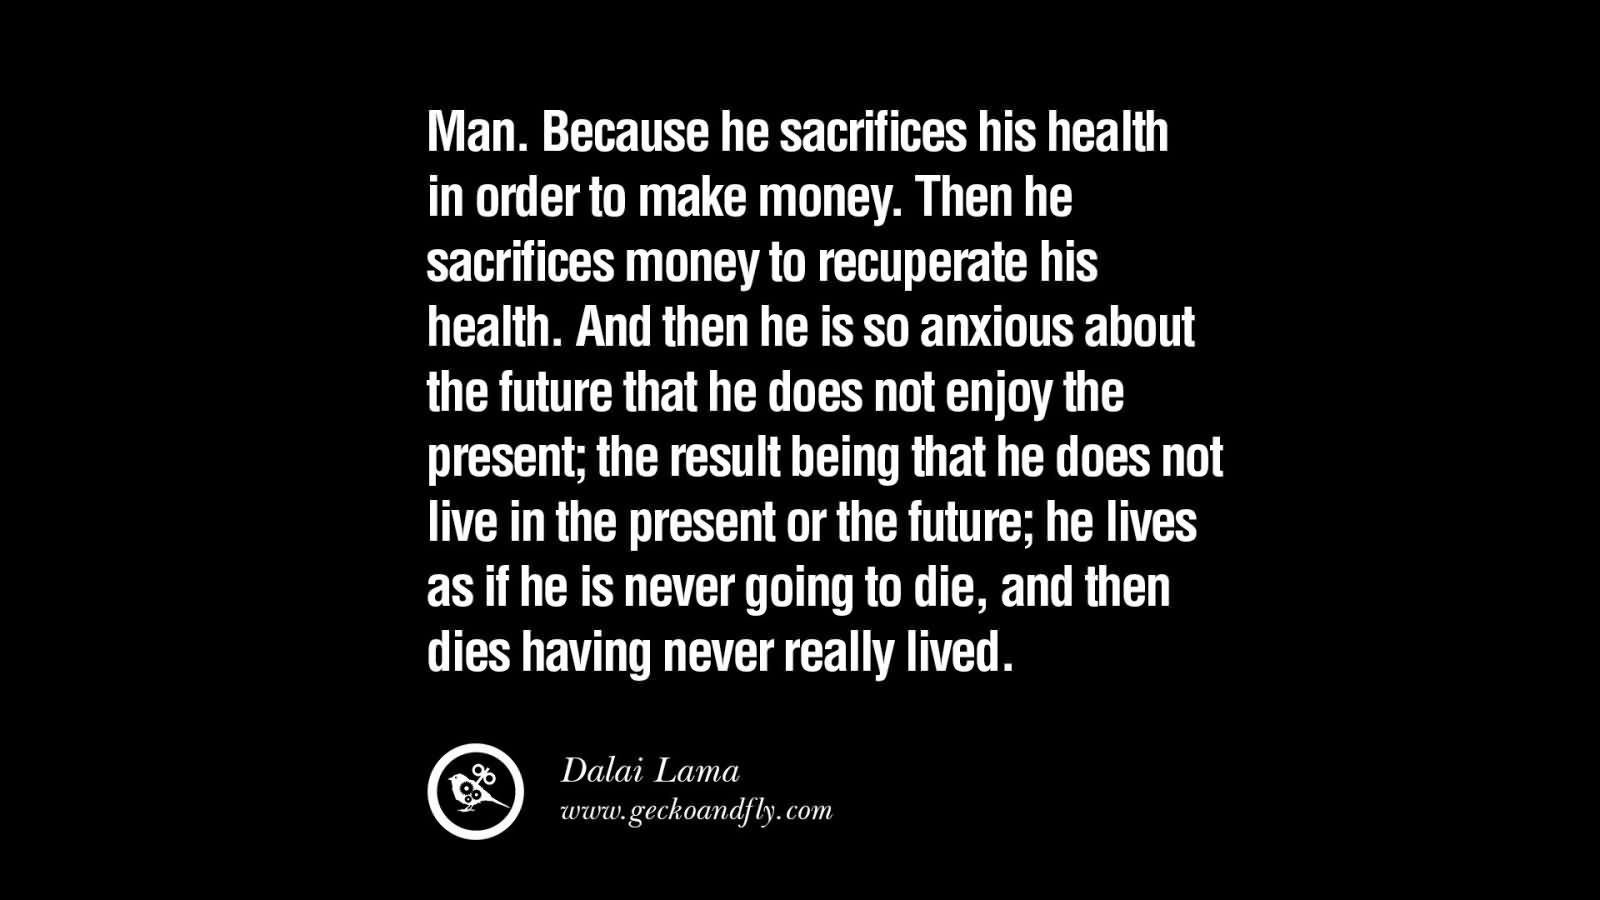 Man. Because he sacrifices his health in order to make money. Then he sacrifices money to recuperate his health. And then he is so anxious